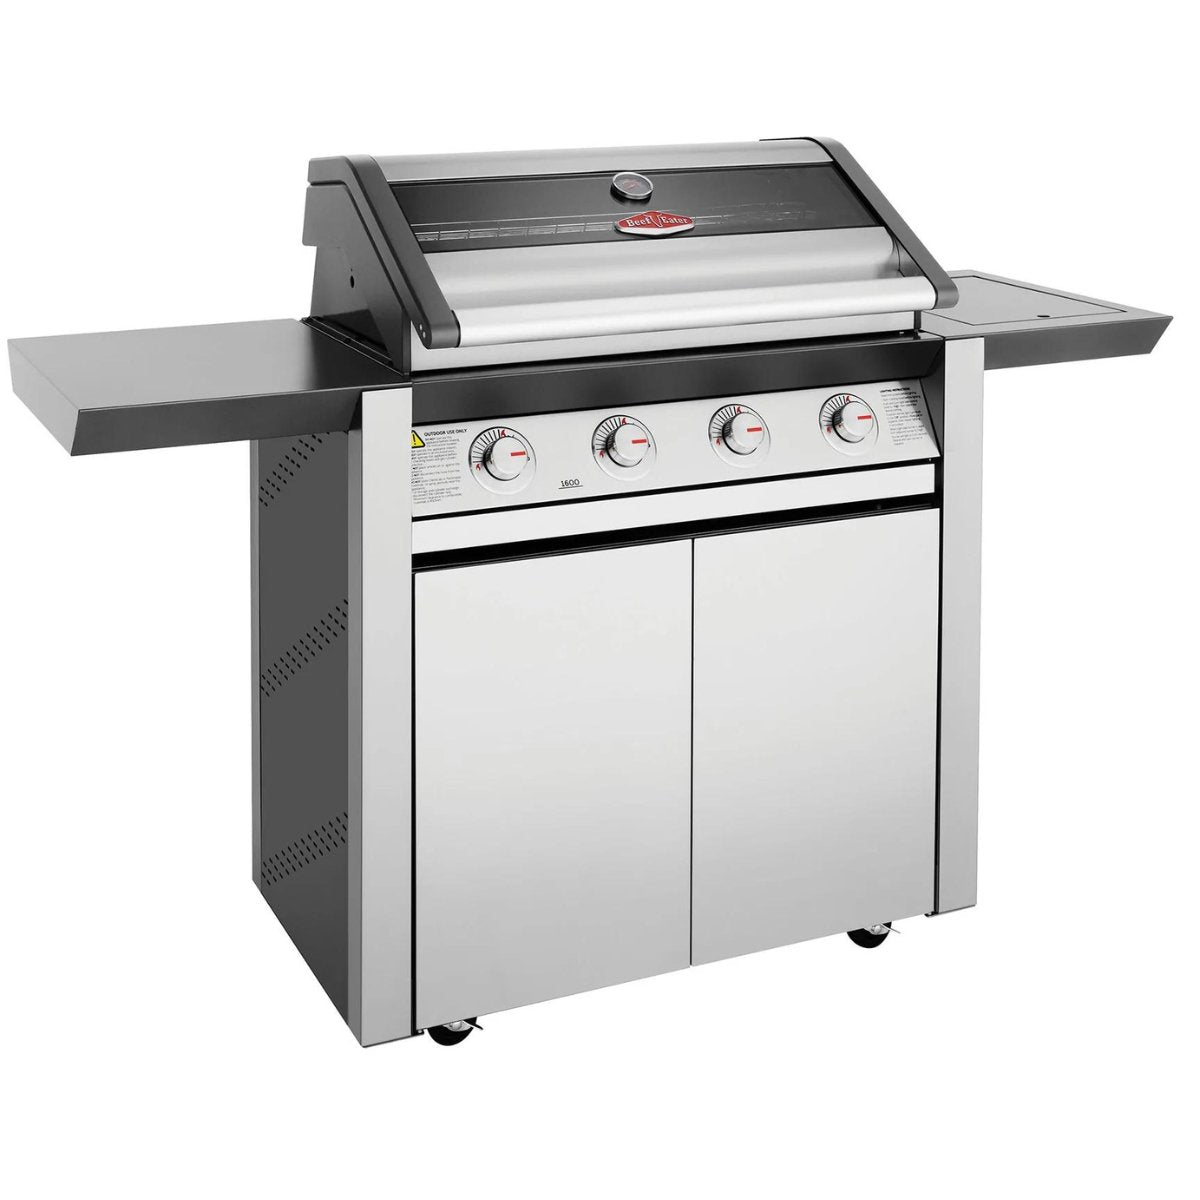 Beefeater 1600S 4 Burner Grill and Side Burner with Cart - Kitchen In The Garden